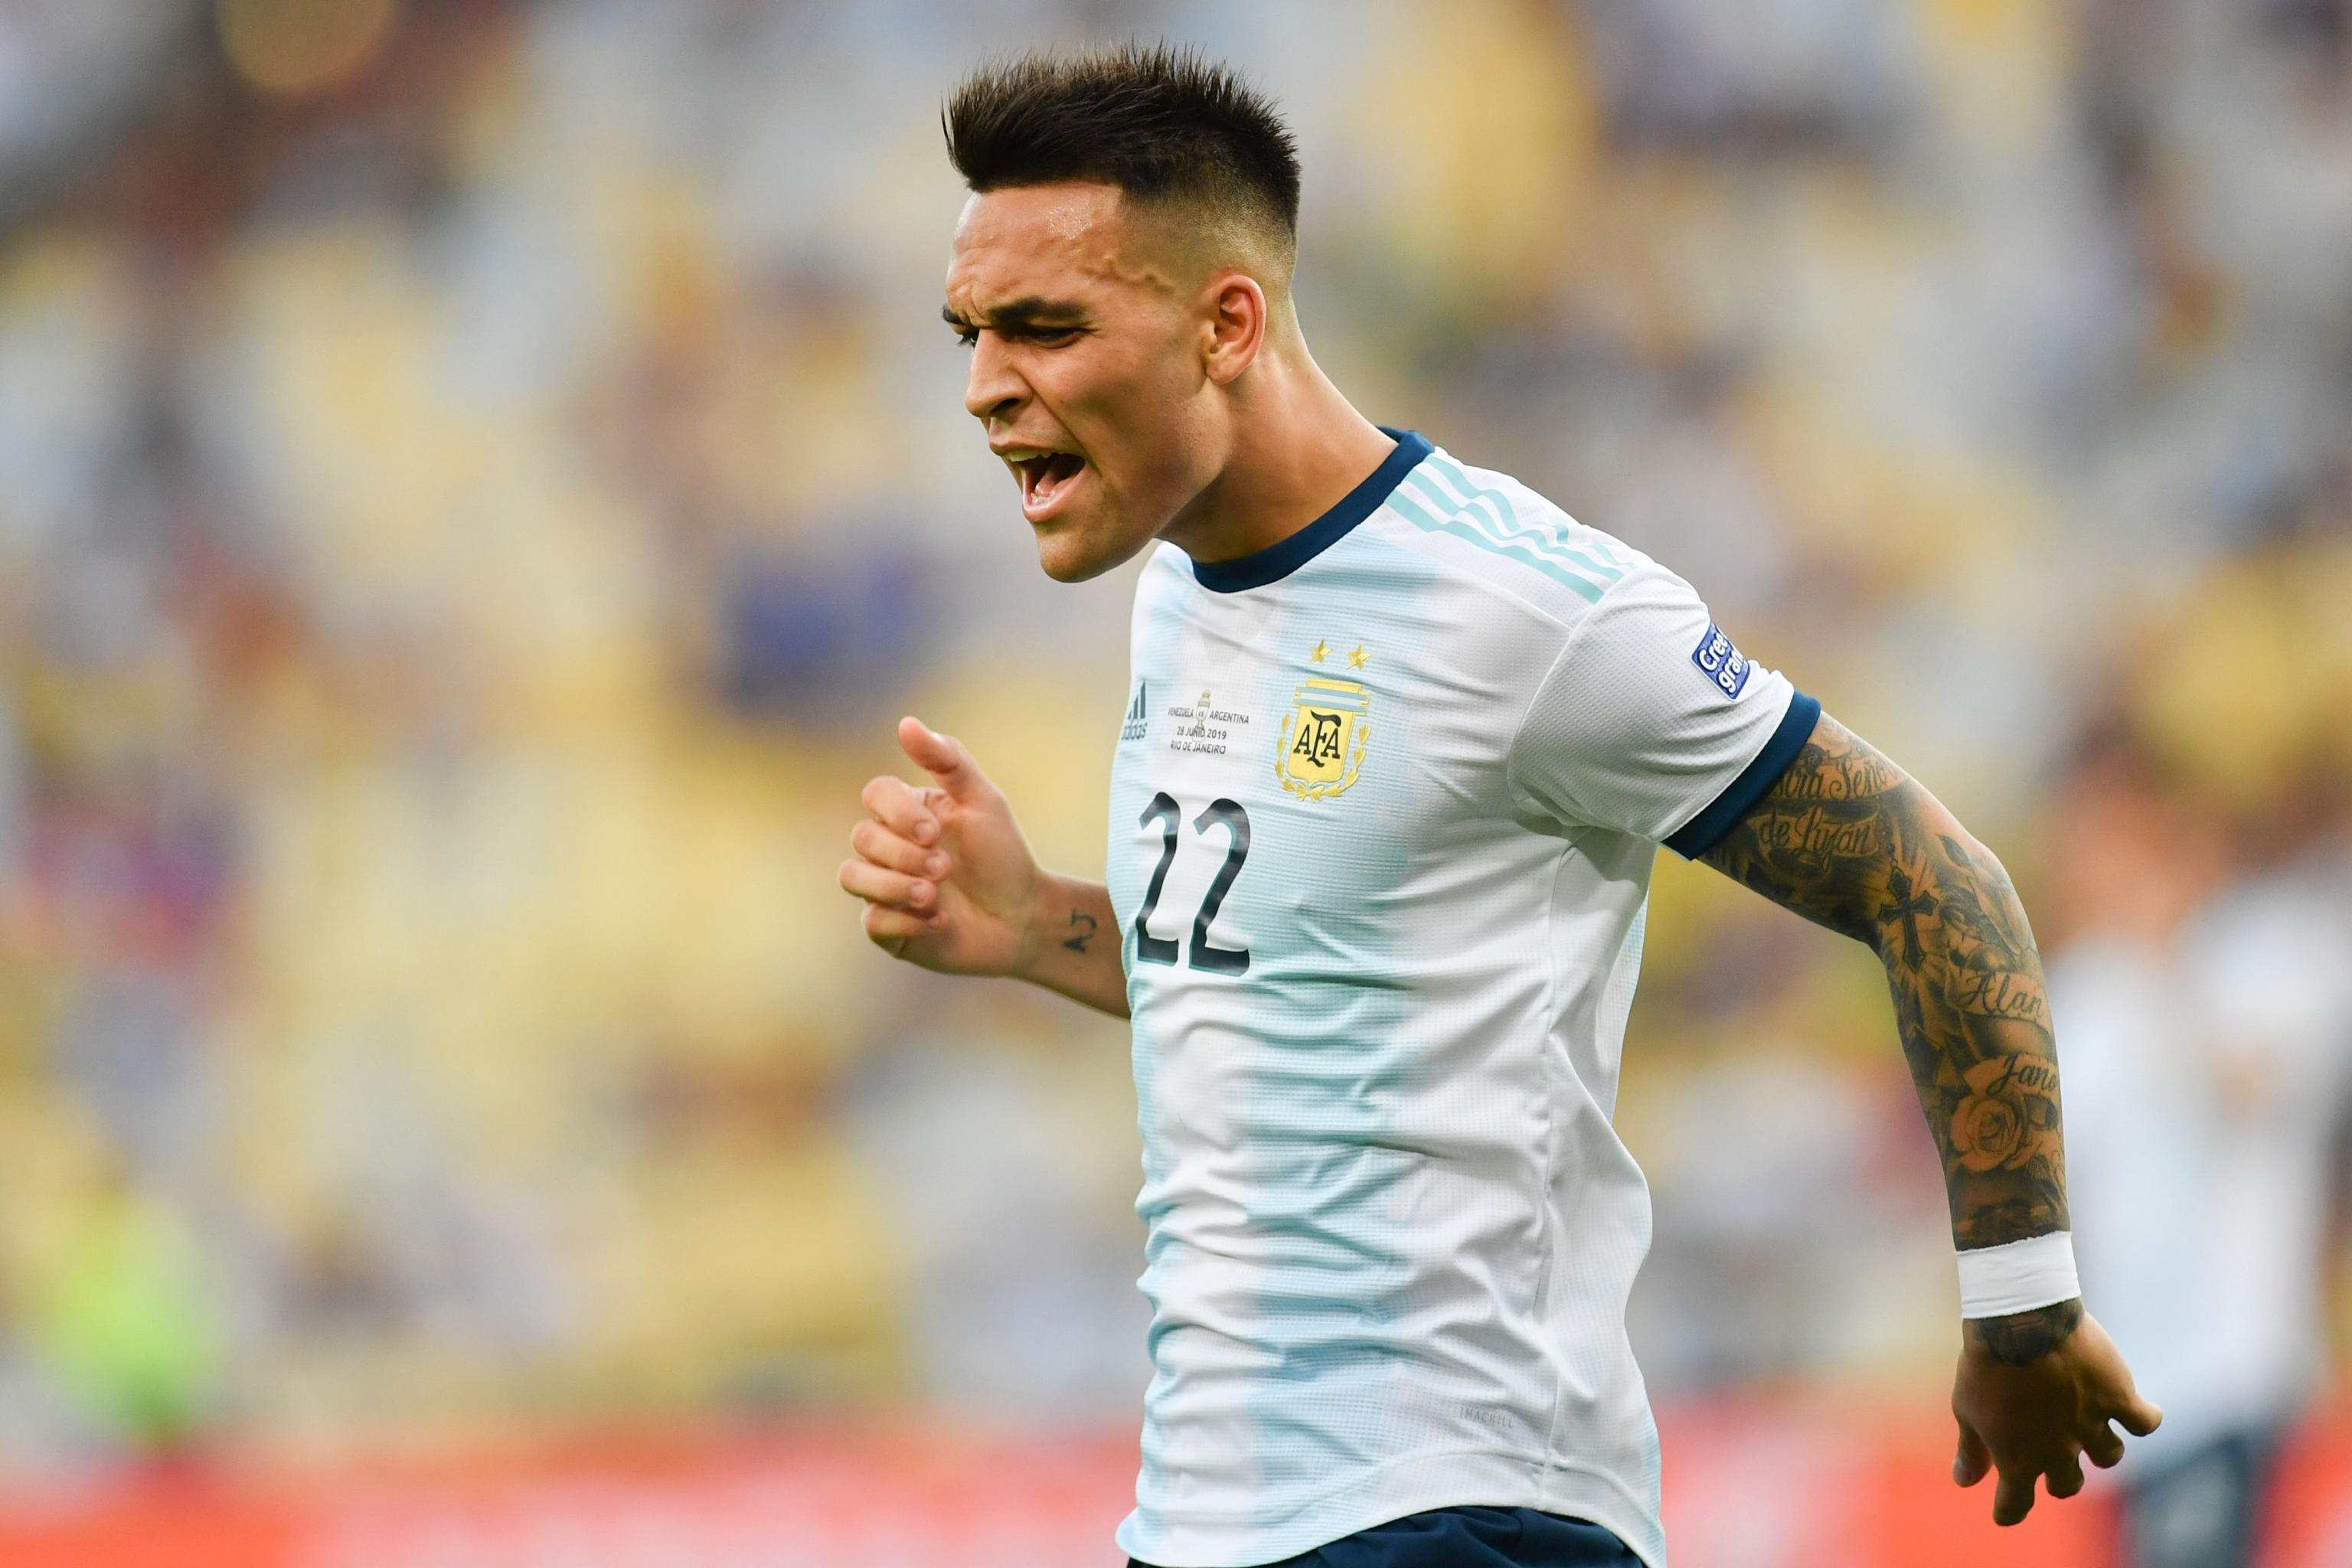 Lautaro Martinez Emerging As One Of The Best Young Strikers - International  Champions Cup